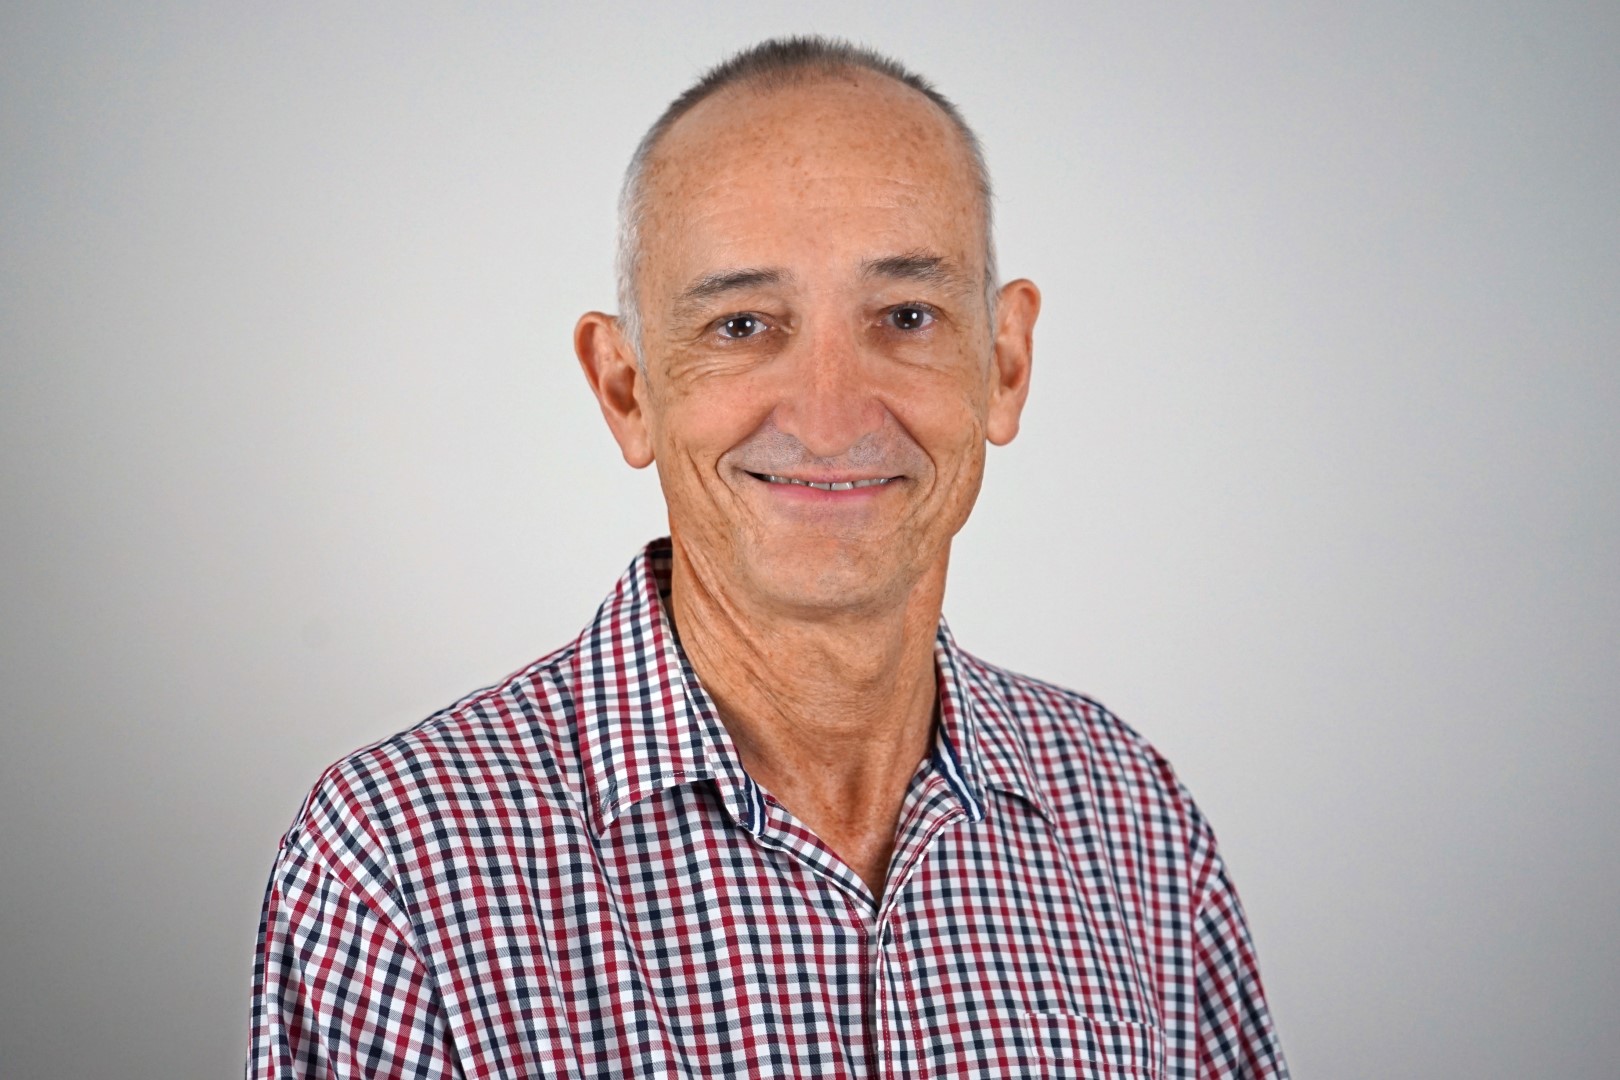 A photo of board member David looking at the camera smiling on a grey background